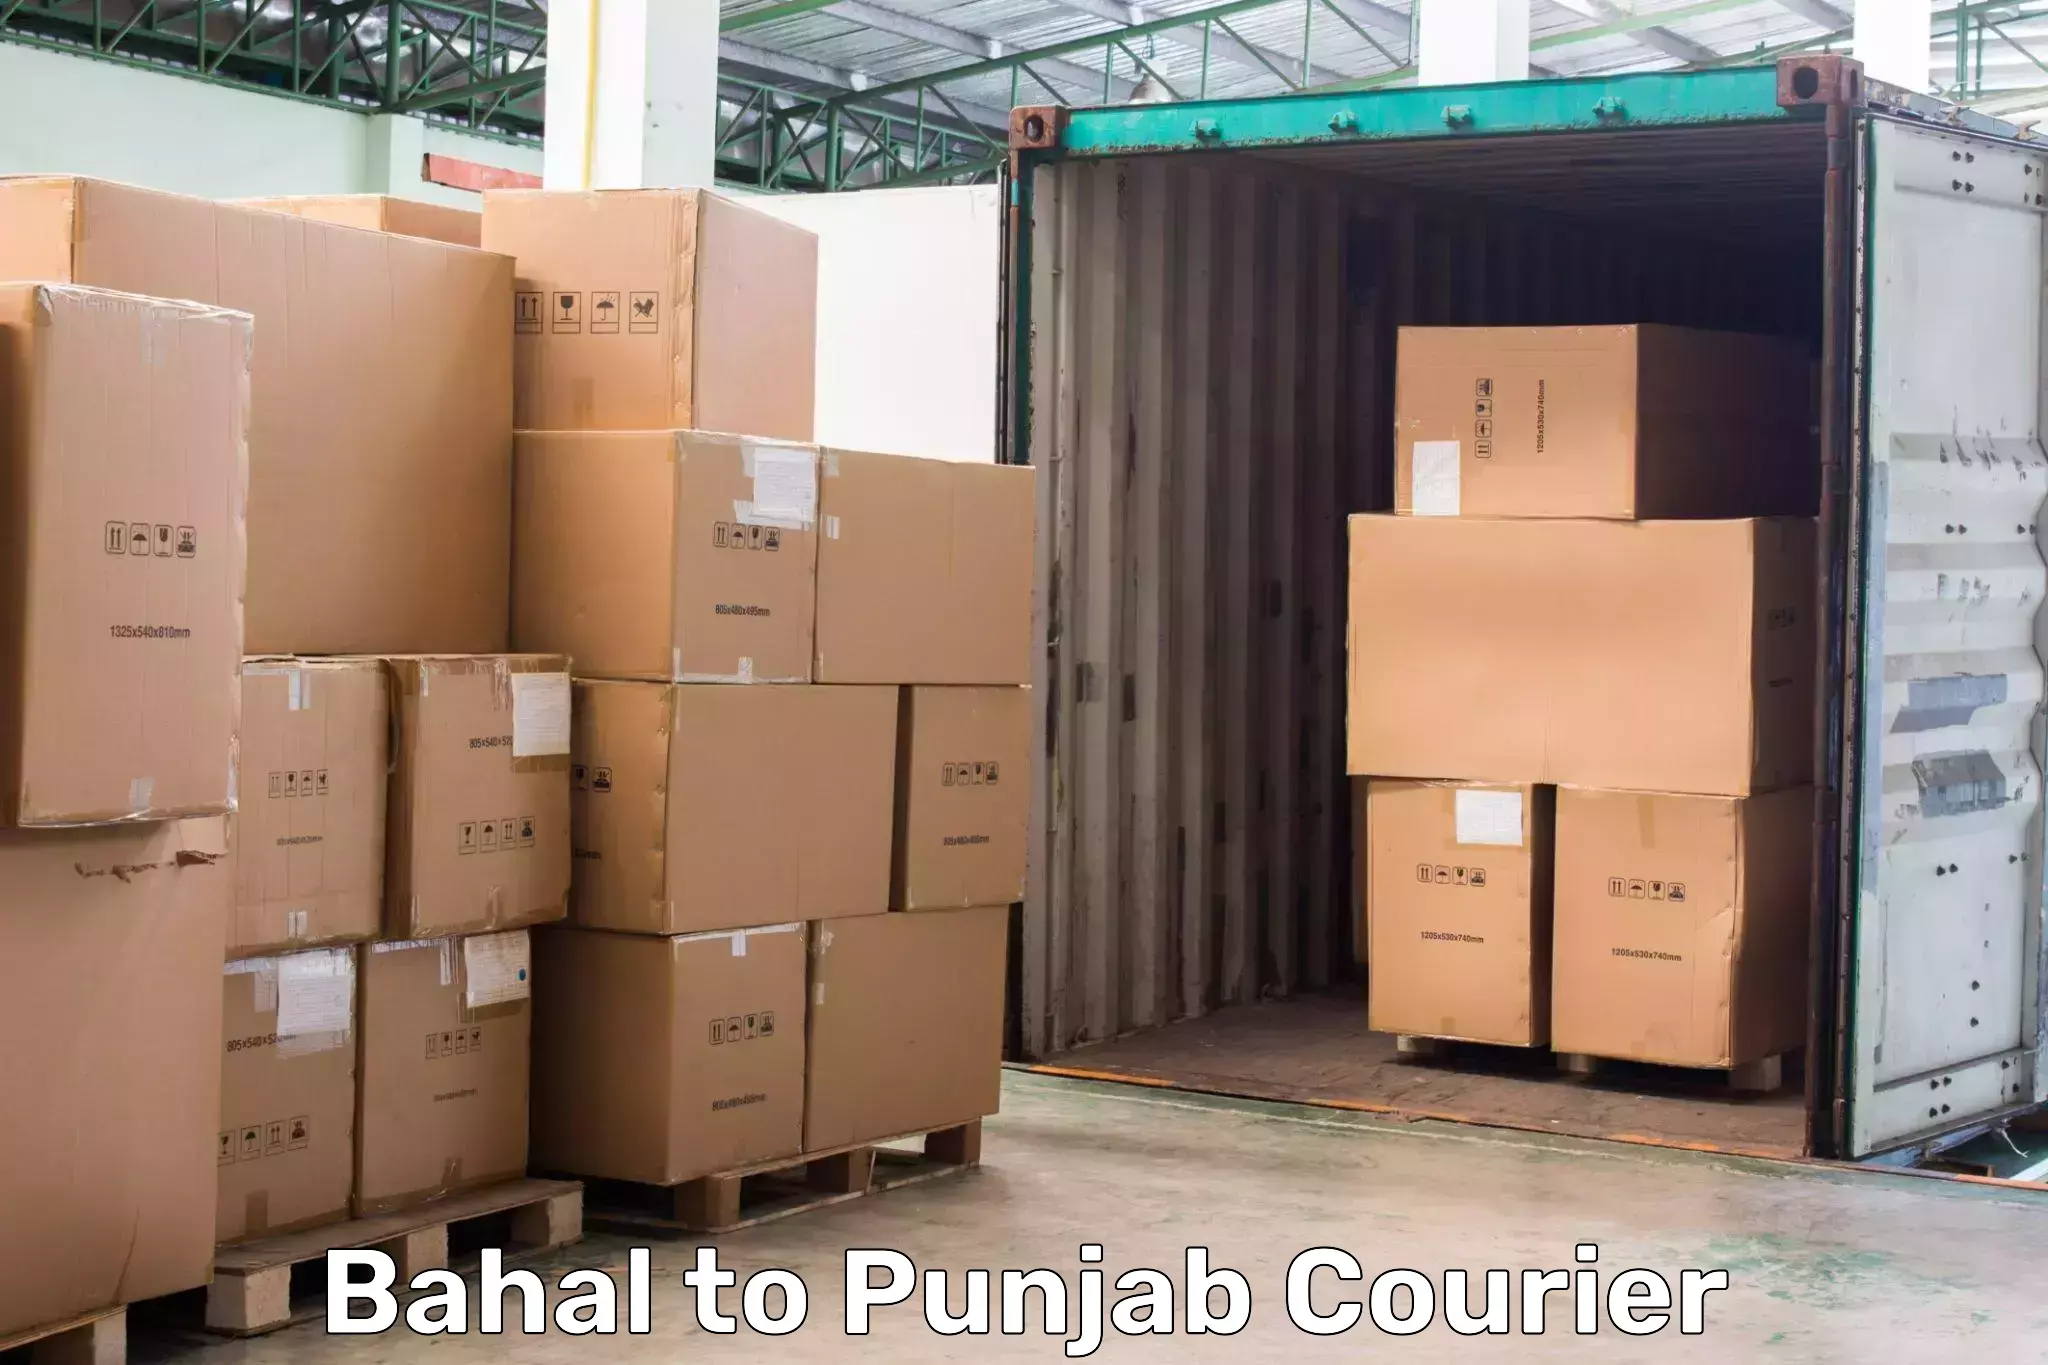 Punctual parcel services Bahal to Amritsar